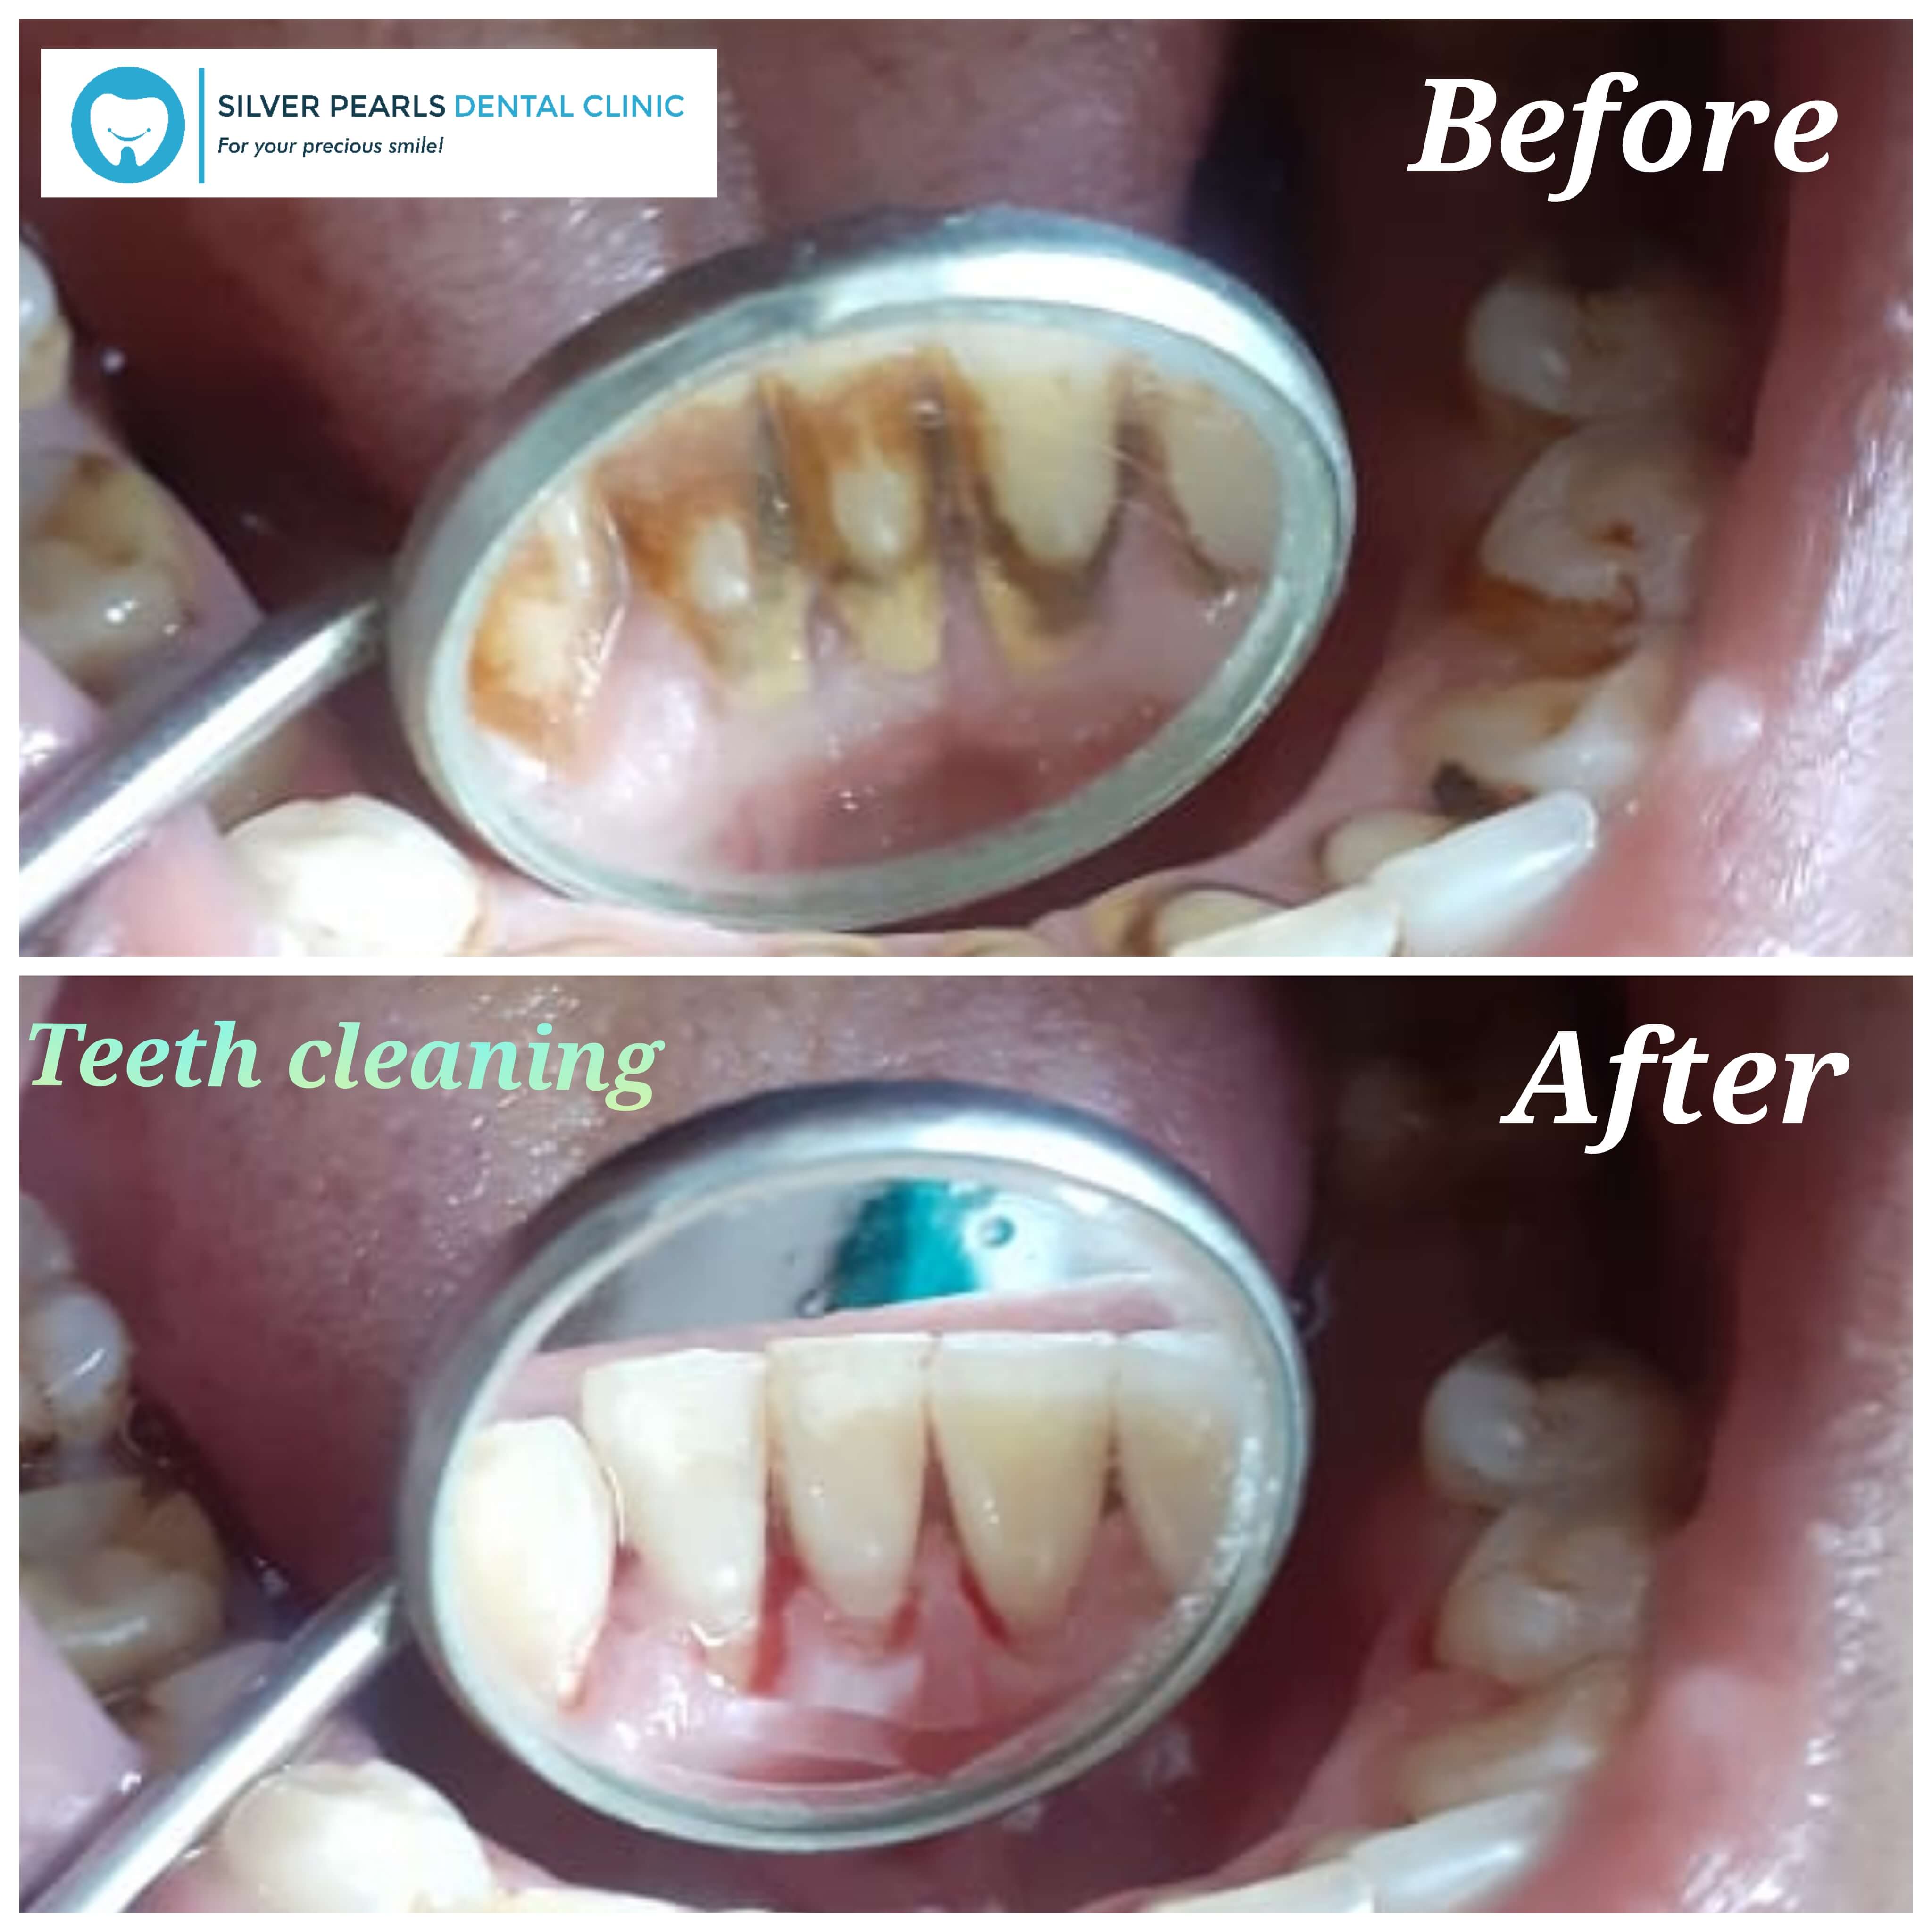 If teeth cleaning is not done regularly, then there is possibility to lead gum infection (gingivitis) and bone loss (periodontitis).